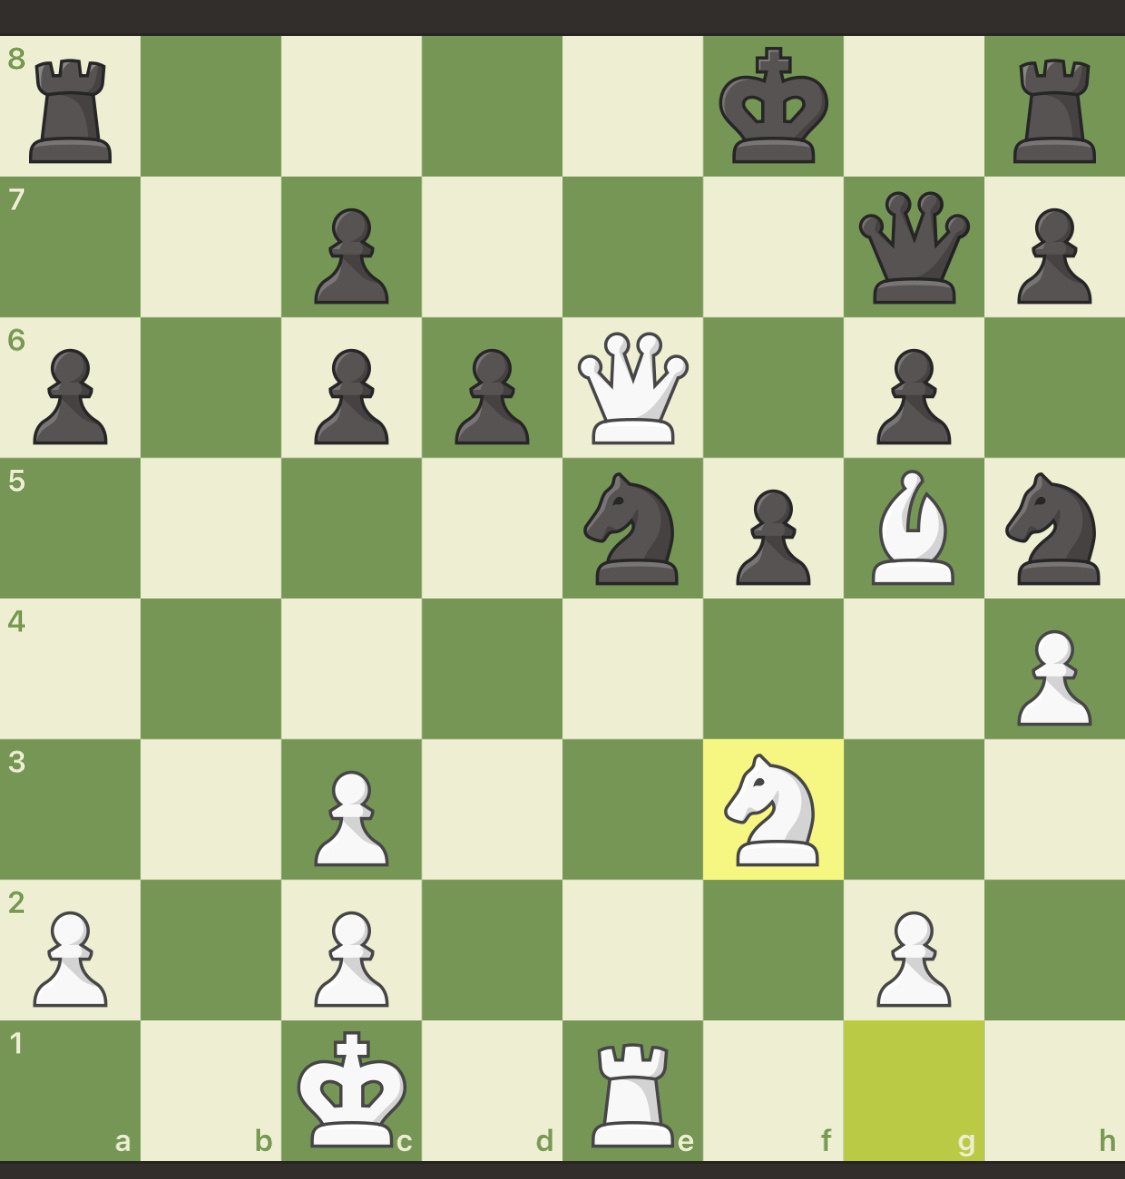 A chess game I’m playing.